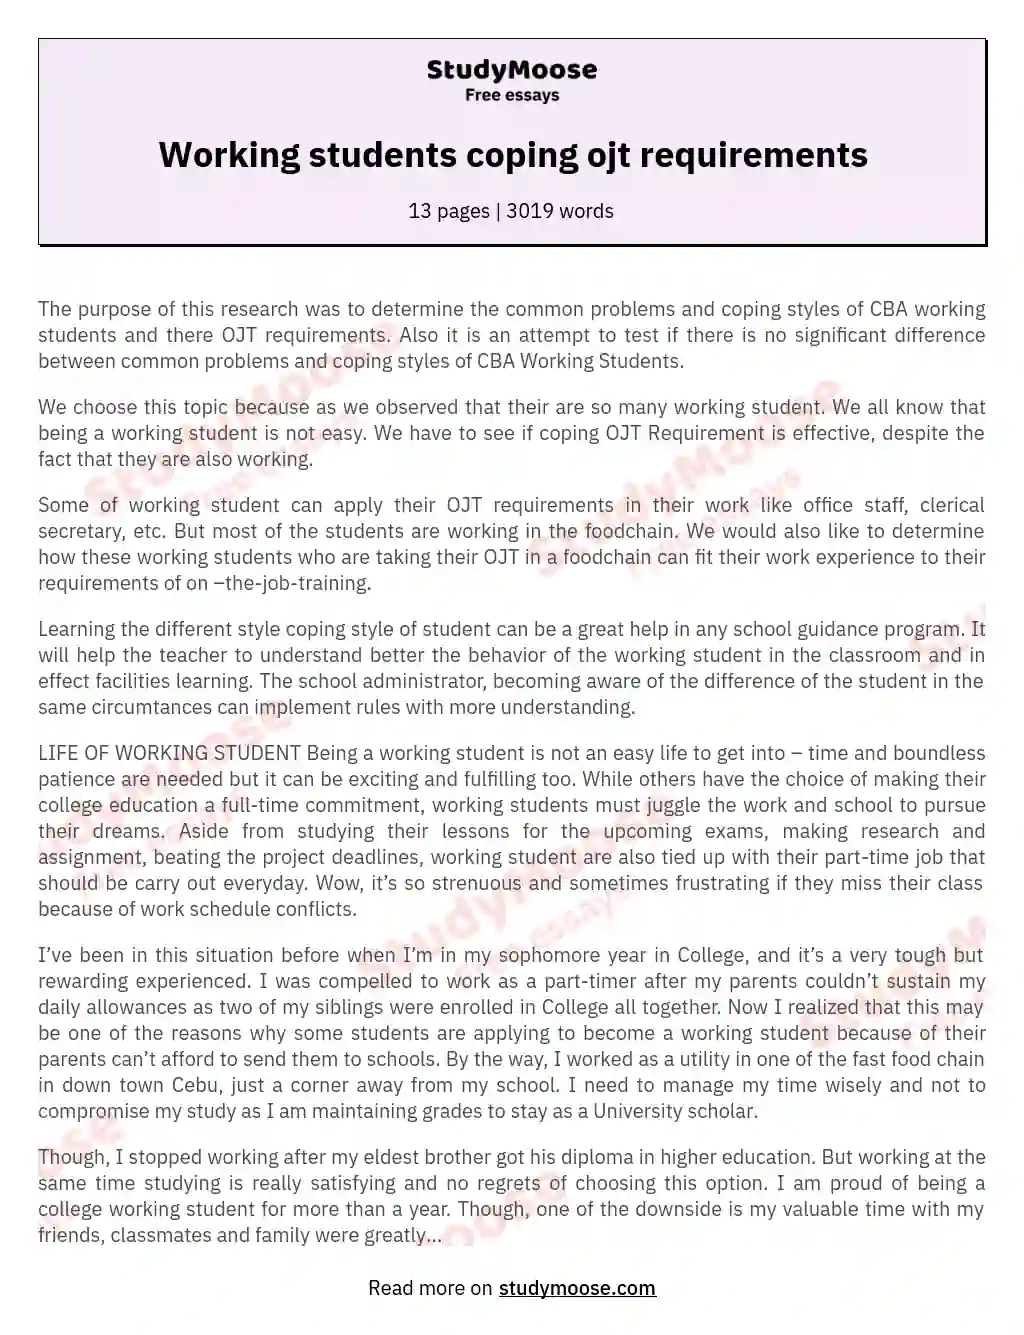 Working students coping ojt requirements essay